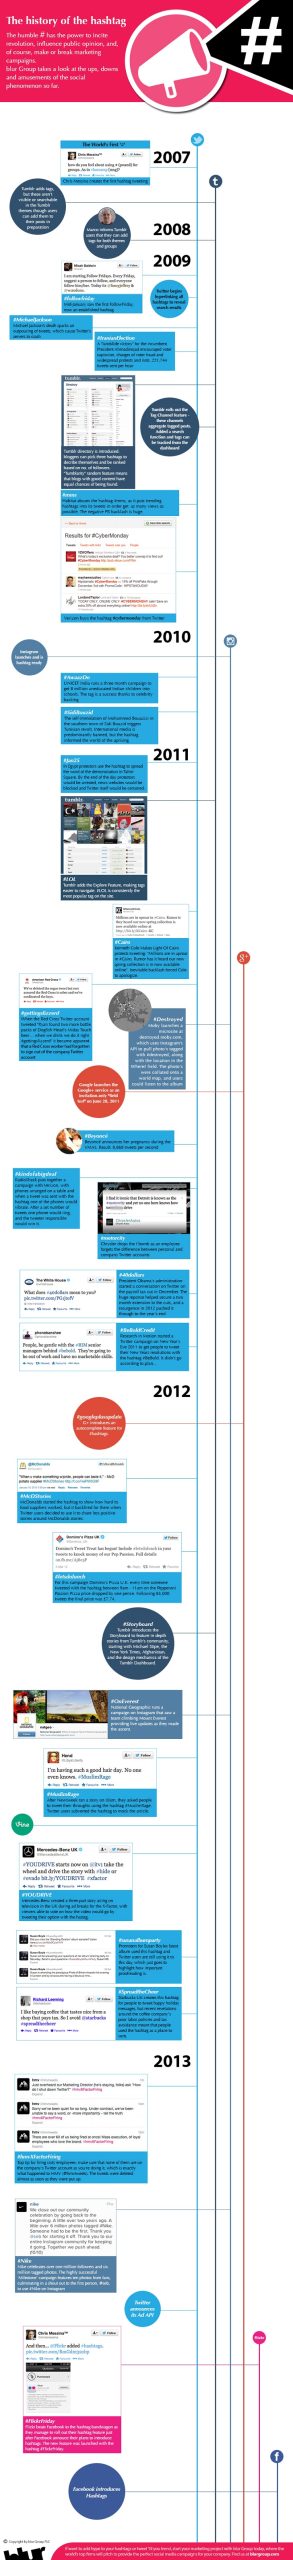 History of the Hashtag Infographic